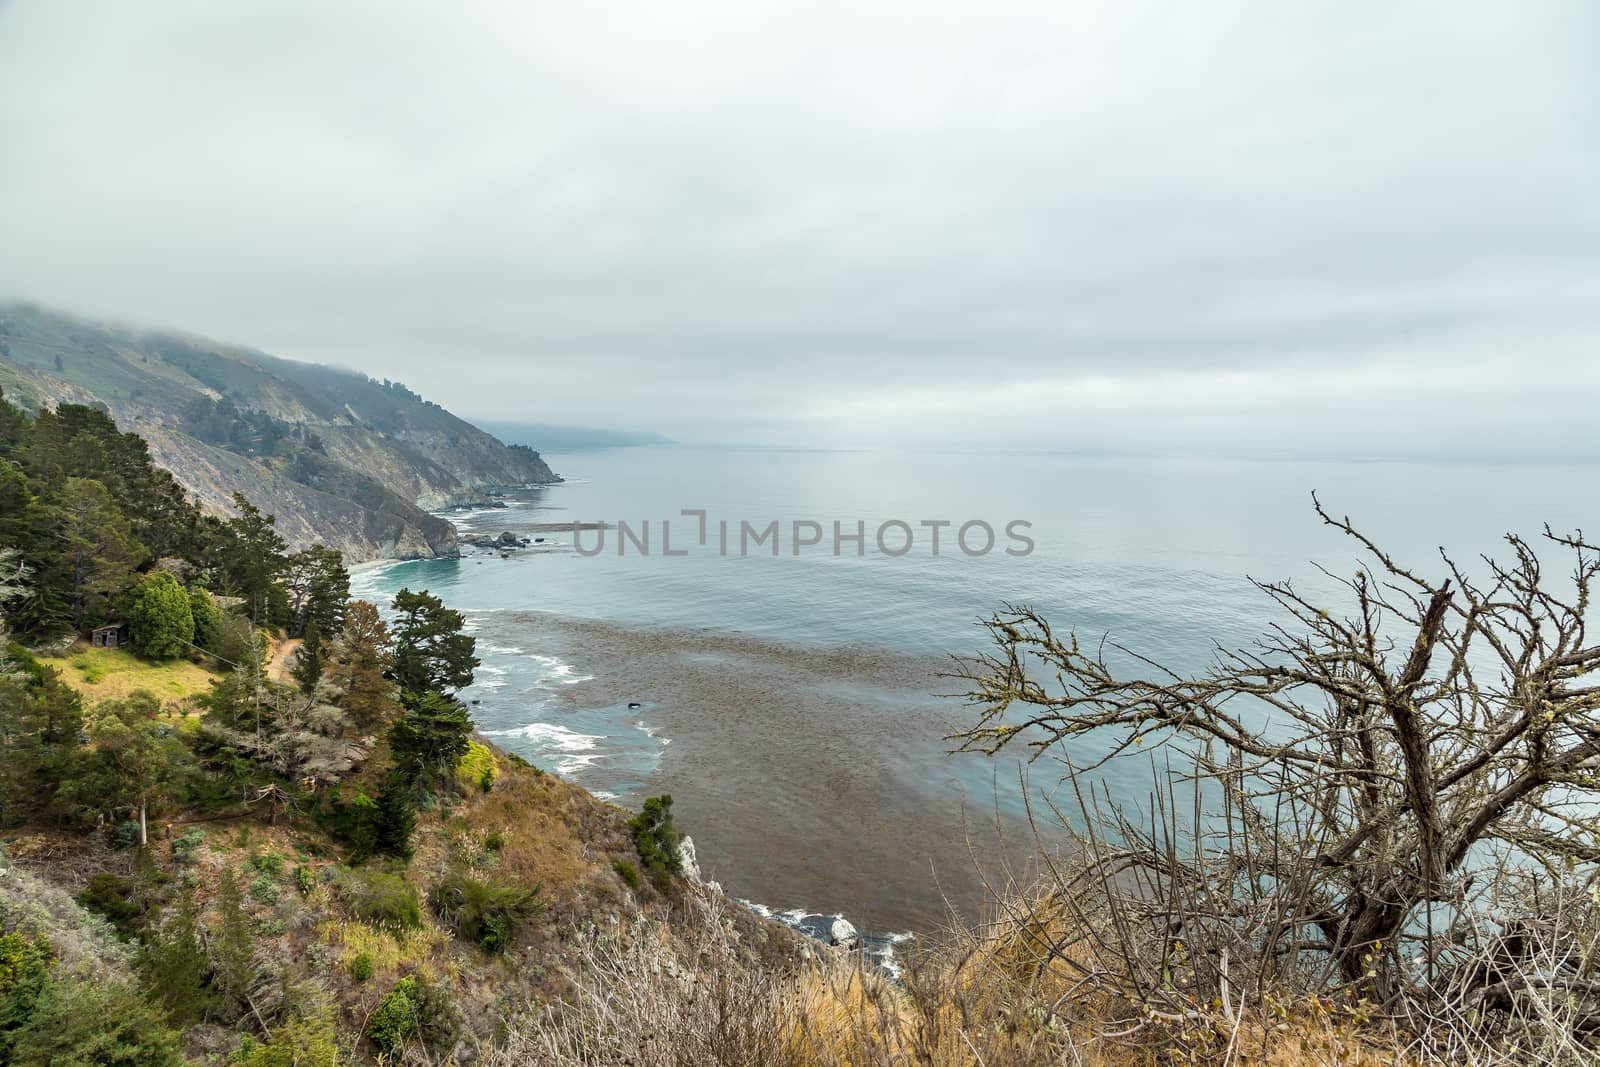 The Pacific Coast Highway (State Route 1) is a major north-south state highway that runs along most of the Pacific coastline of the U.S. state of California.